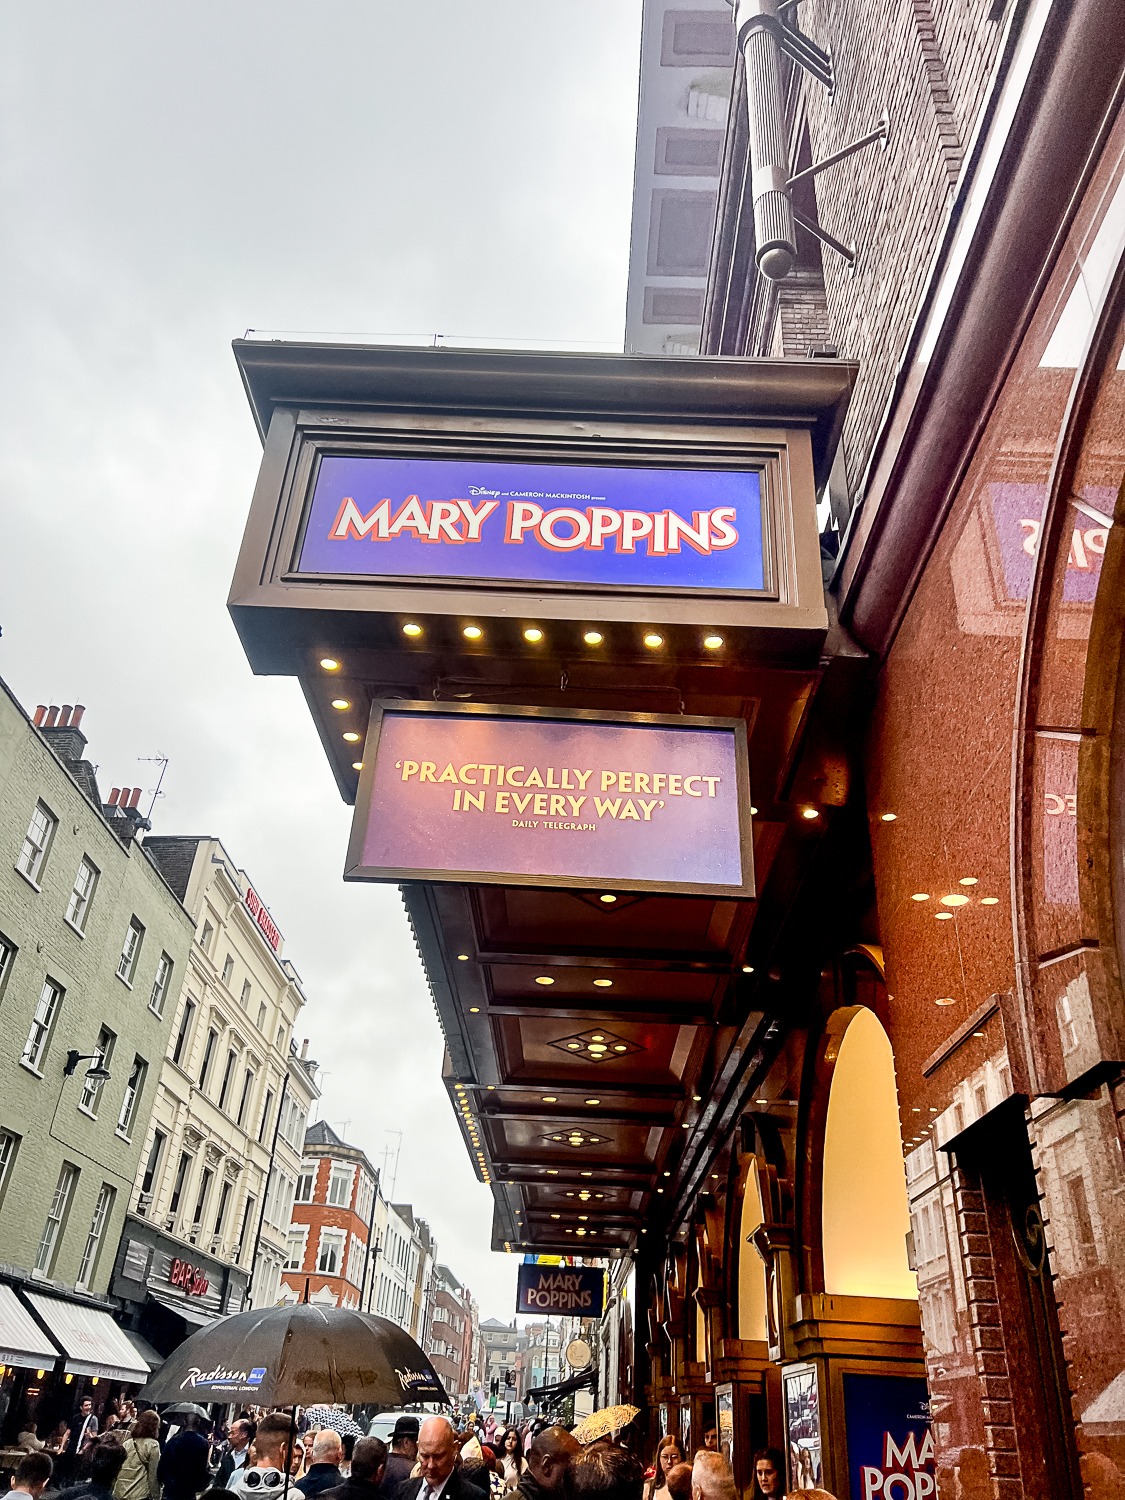 Pacific Globetrotters, budget family travel blog, shares 4 day itinerary in London with kids. Mary Poppins In London